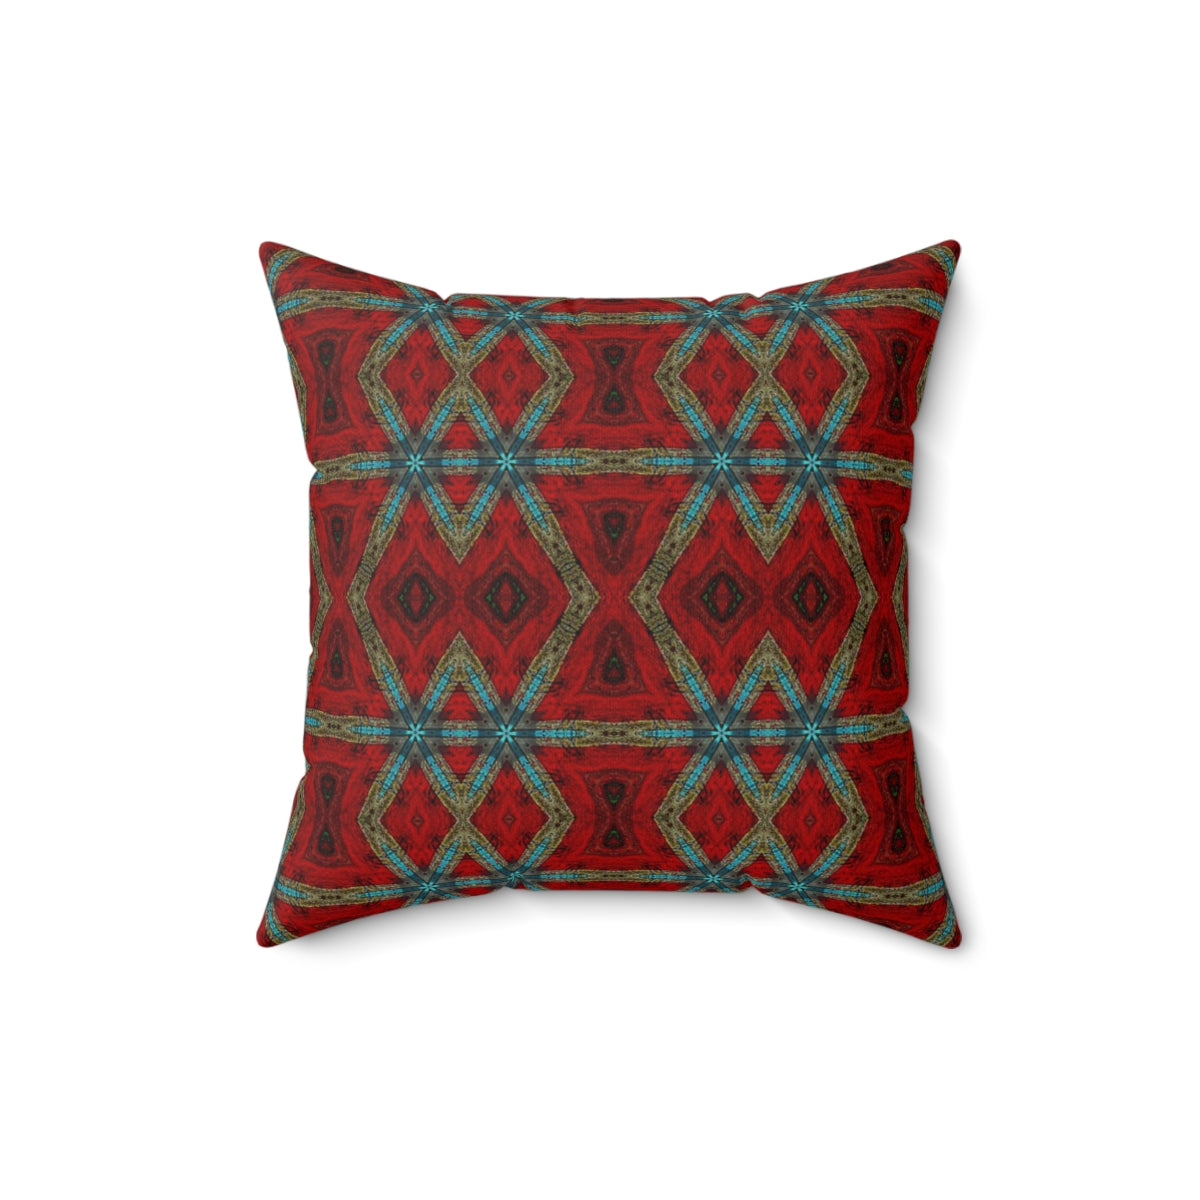 Red Throw pillows for home decor